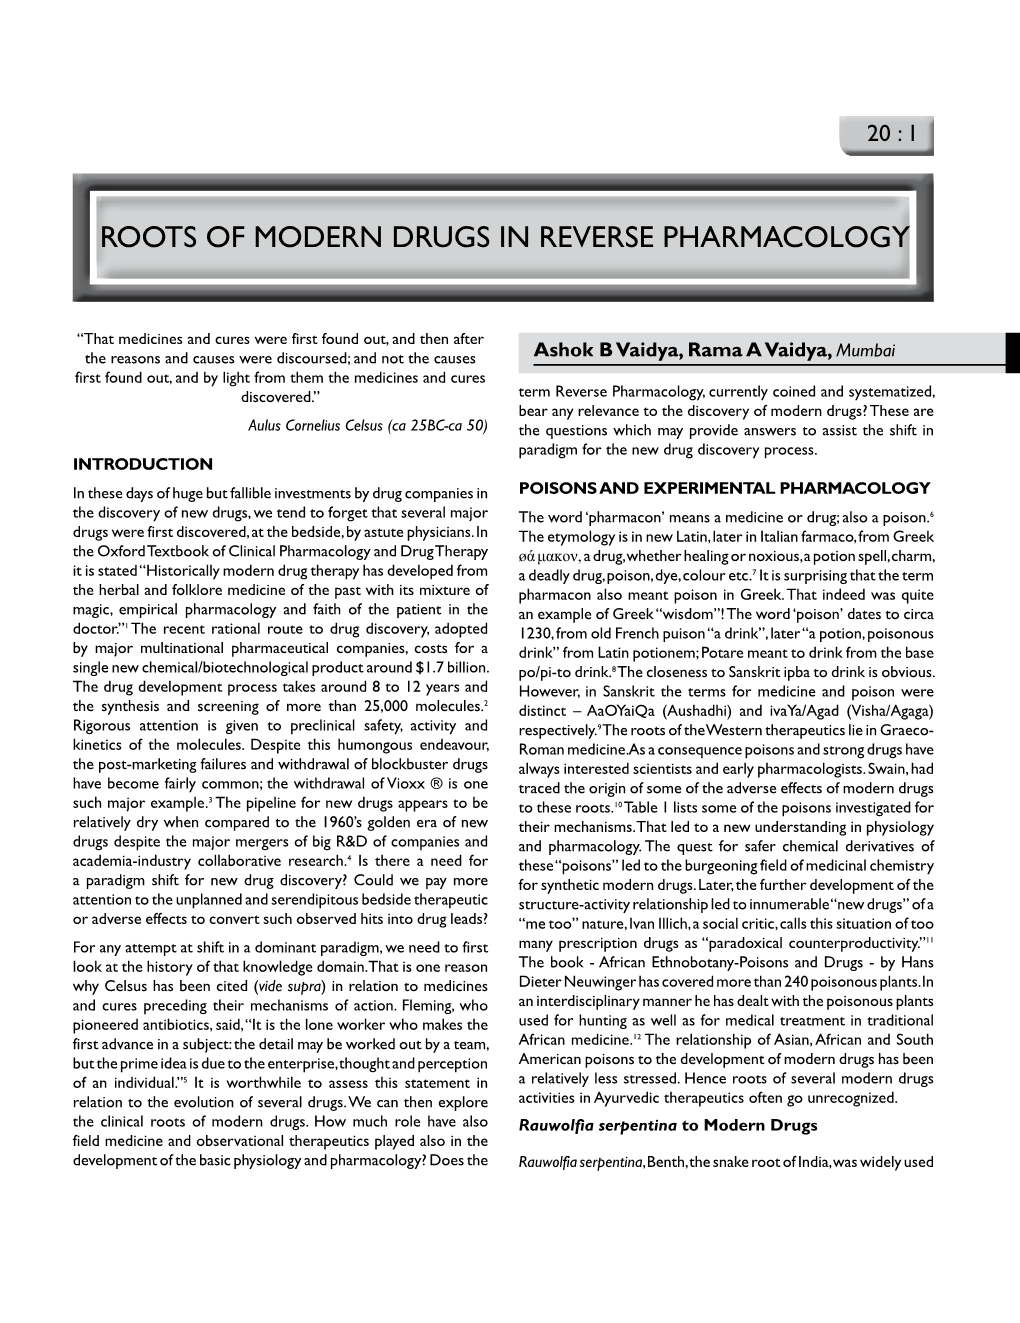 Roots of Modern Drugs in Reverse Pharmacology